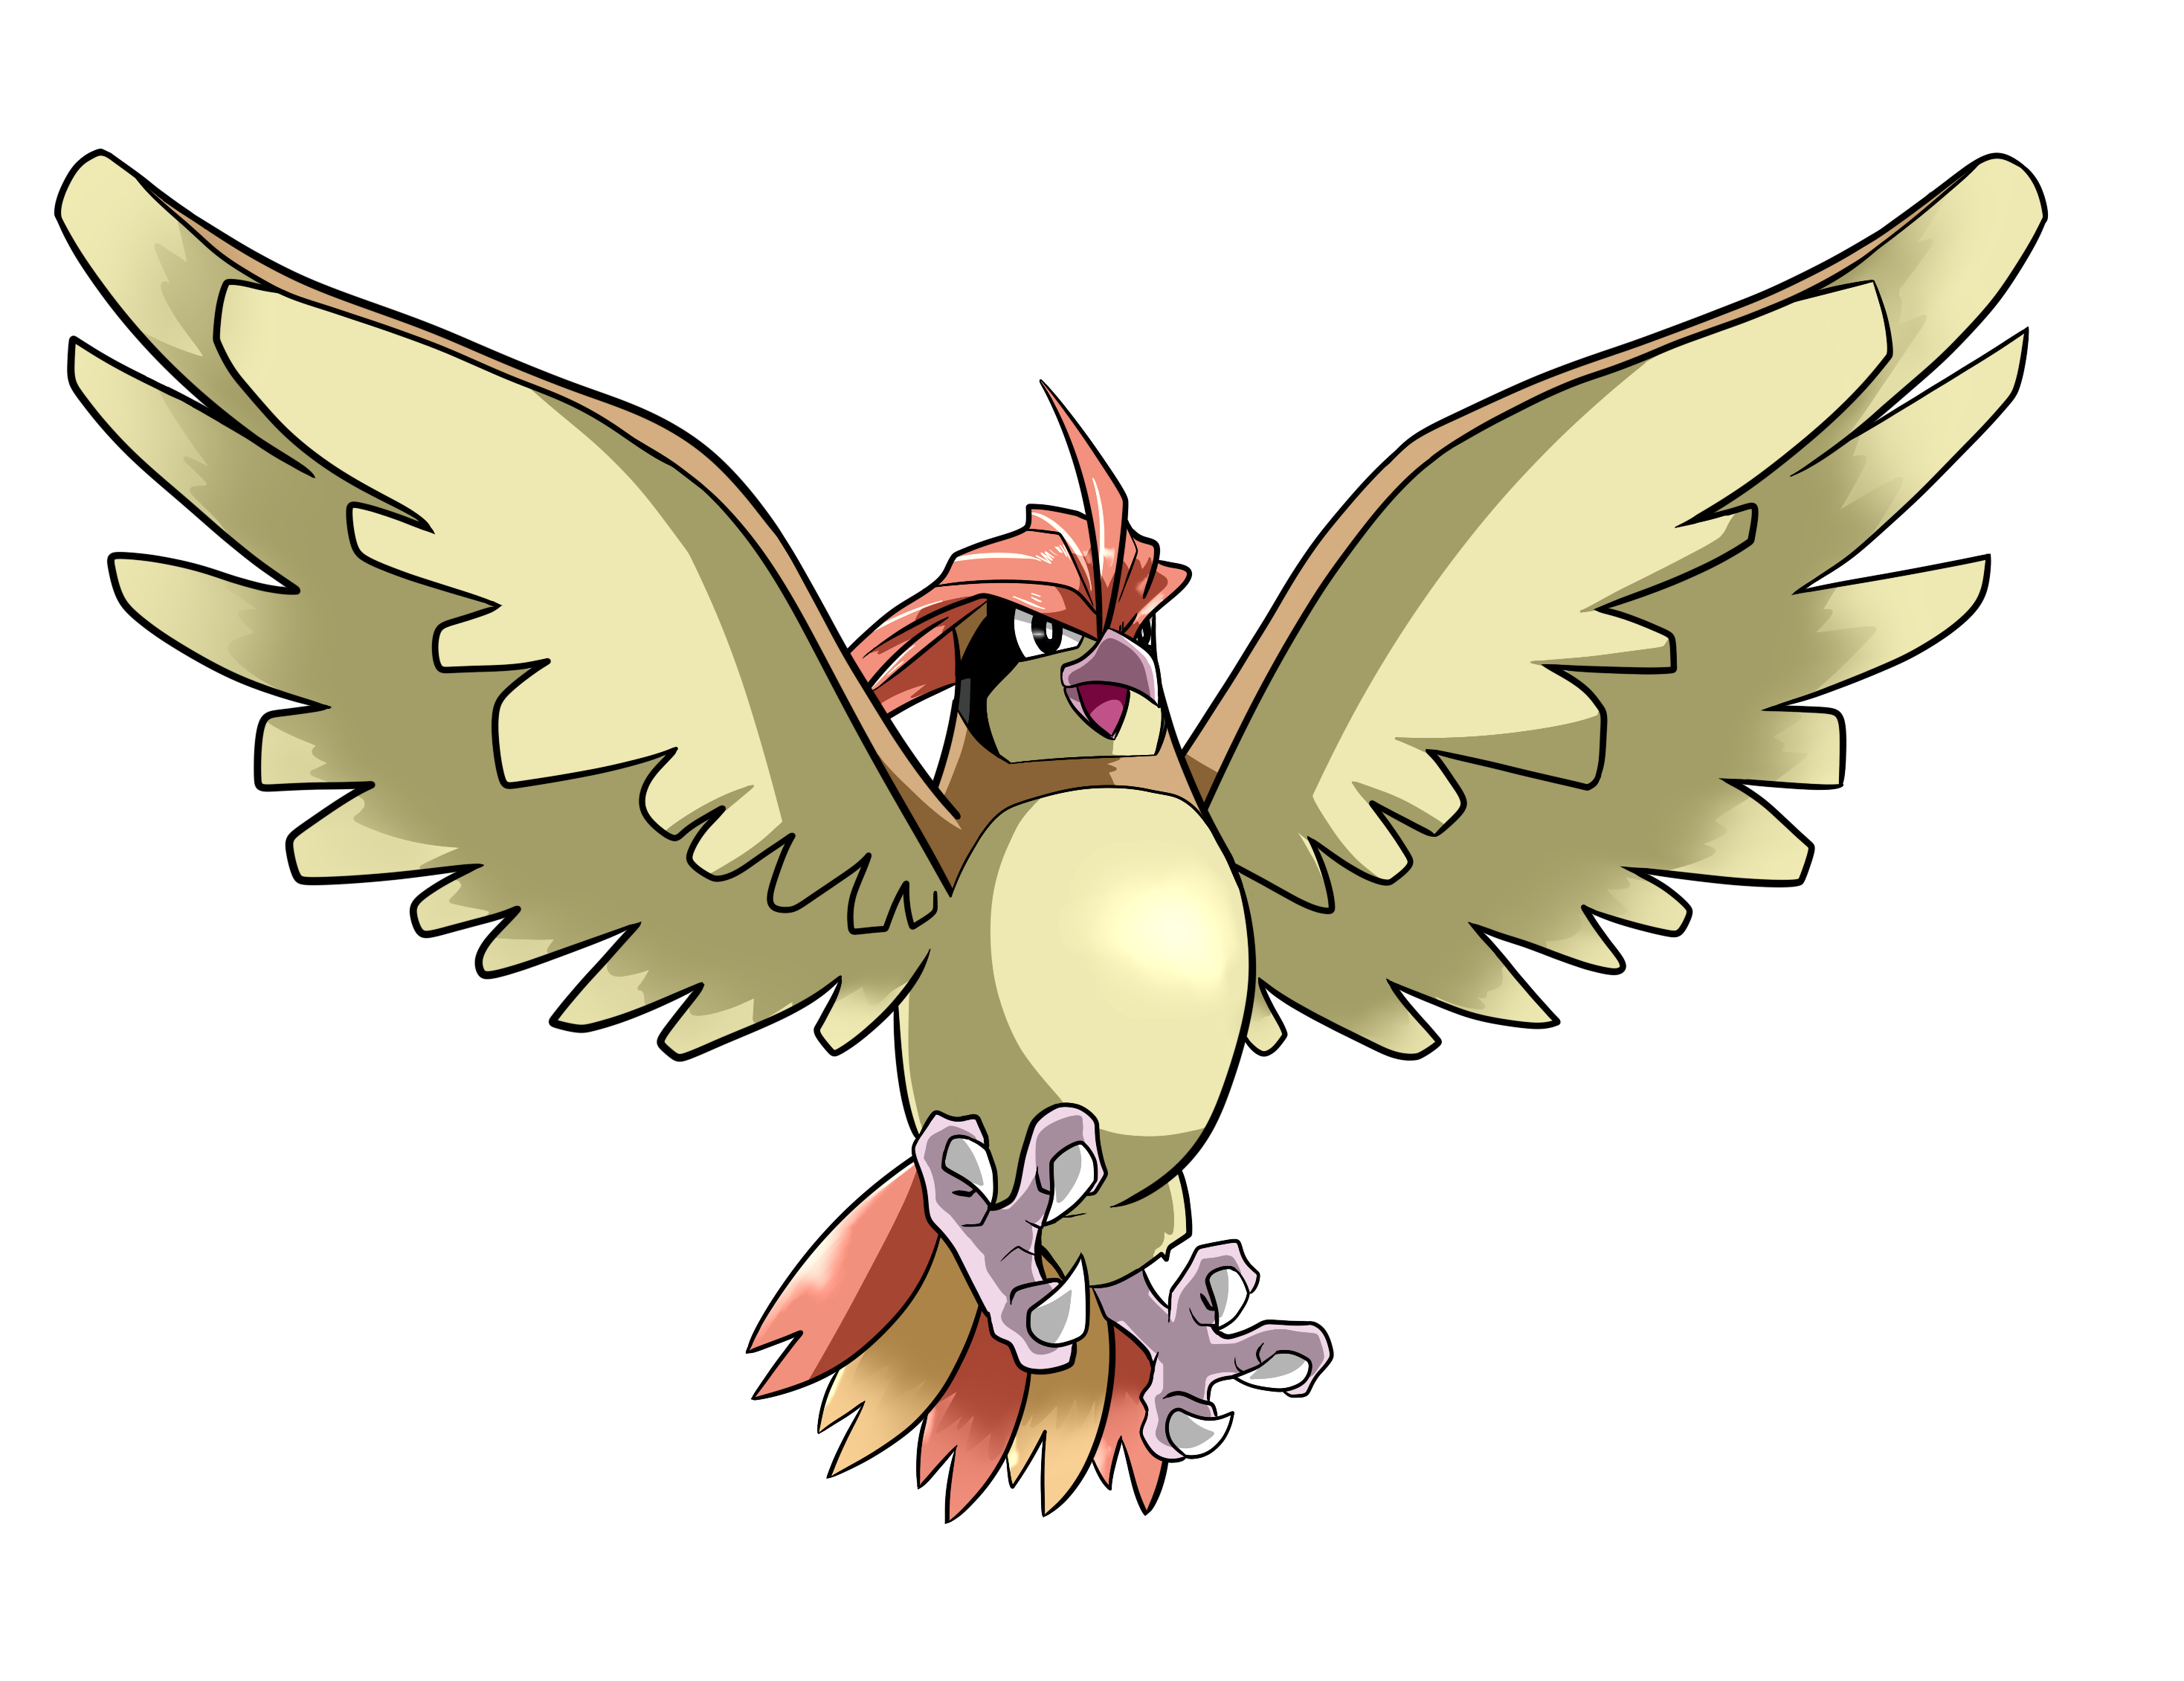 017___pidgeotto_by_pr0xis0ul-d9w4r72.png